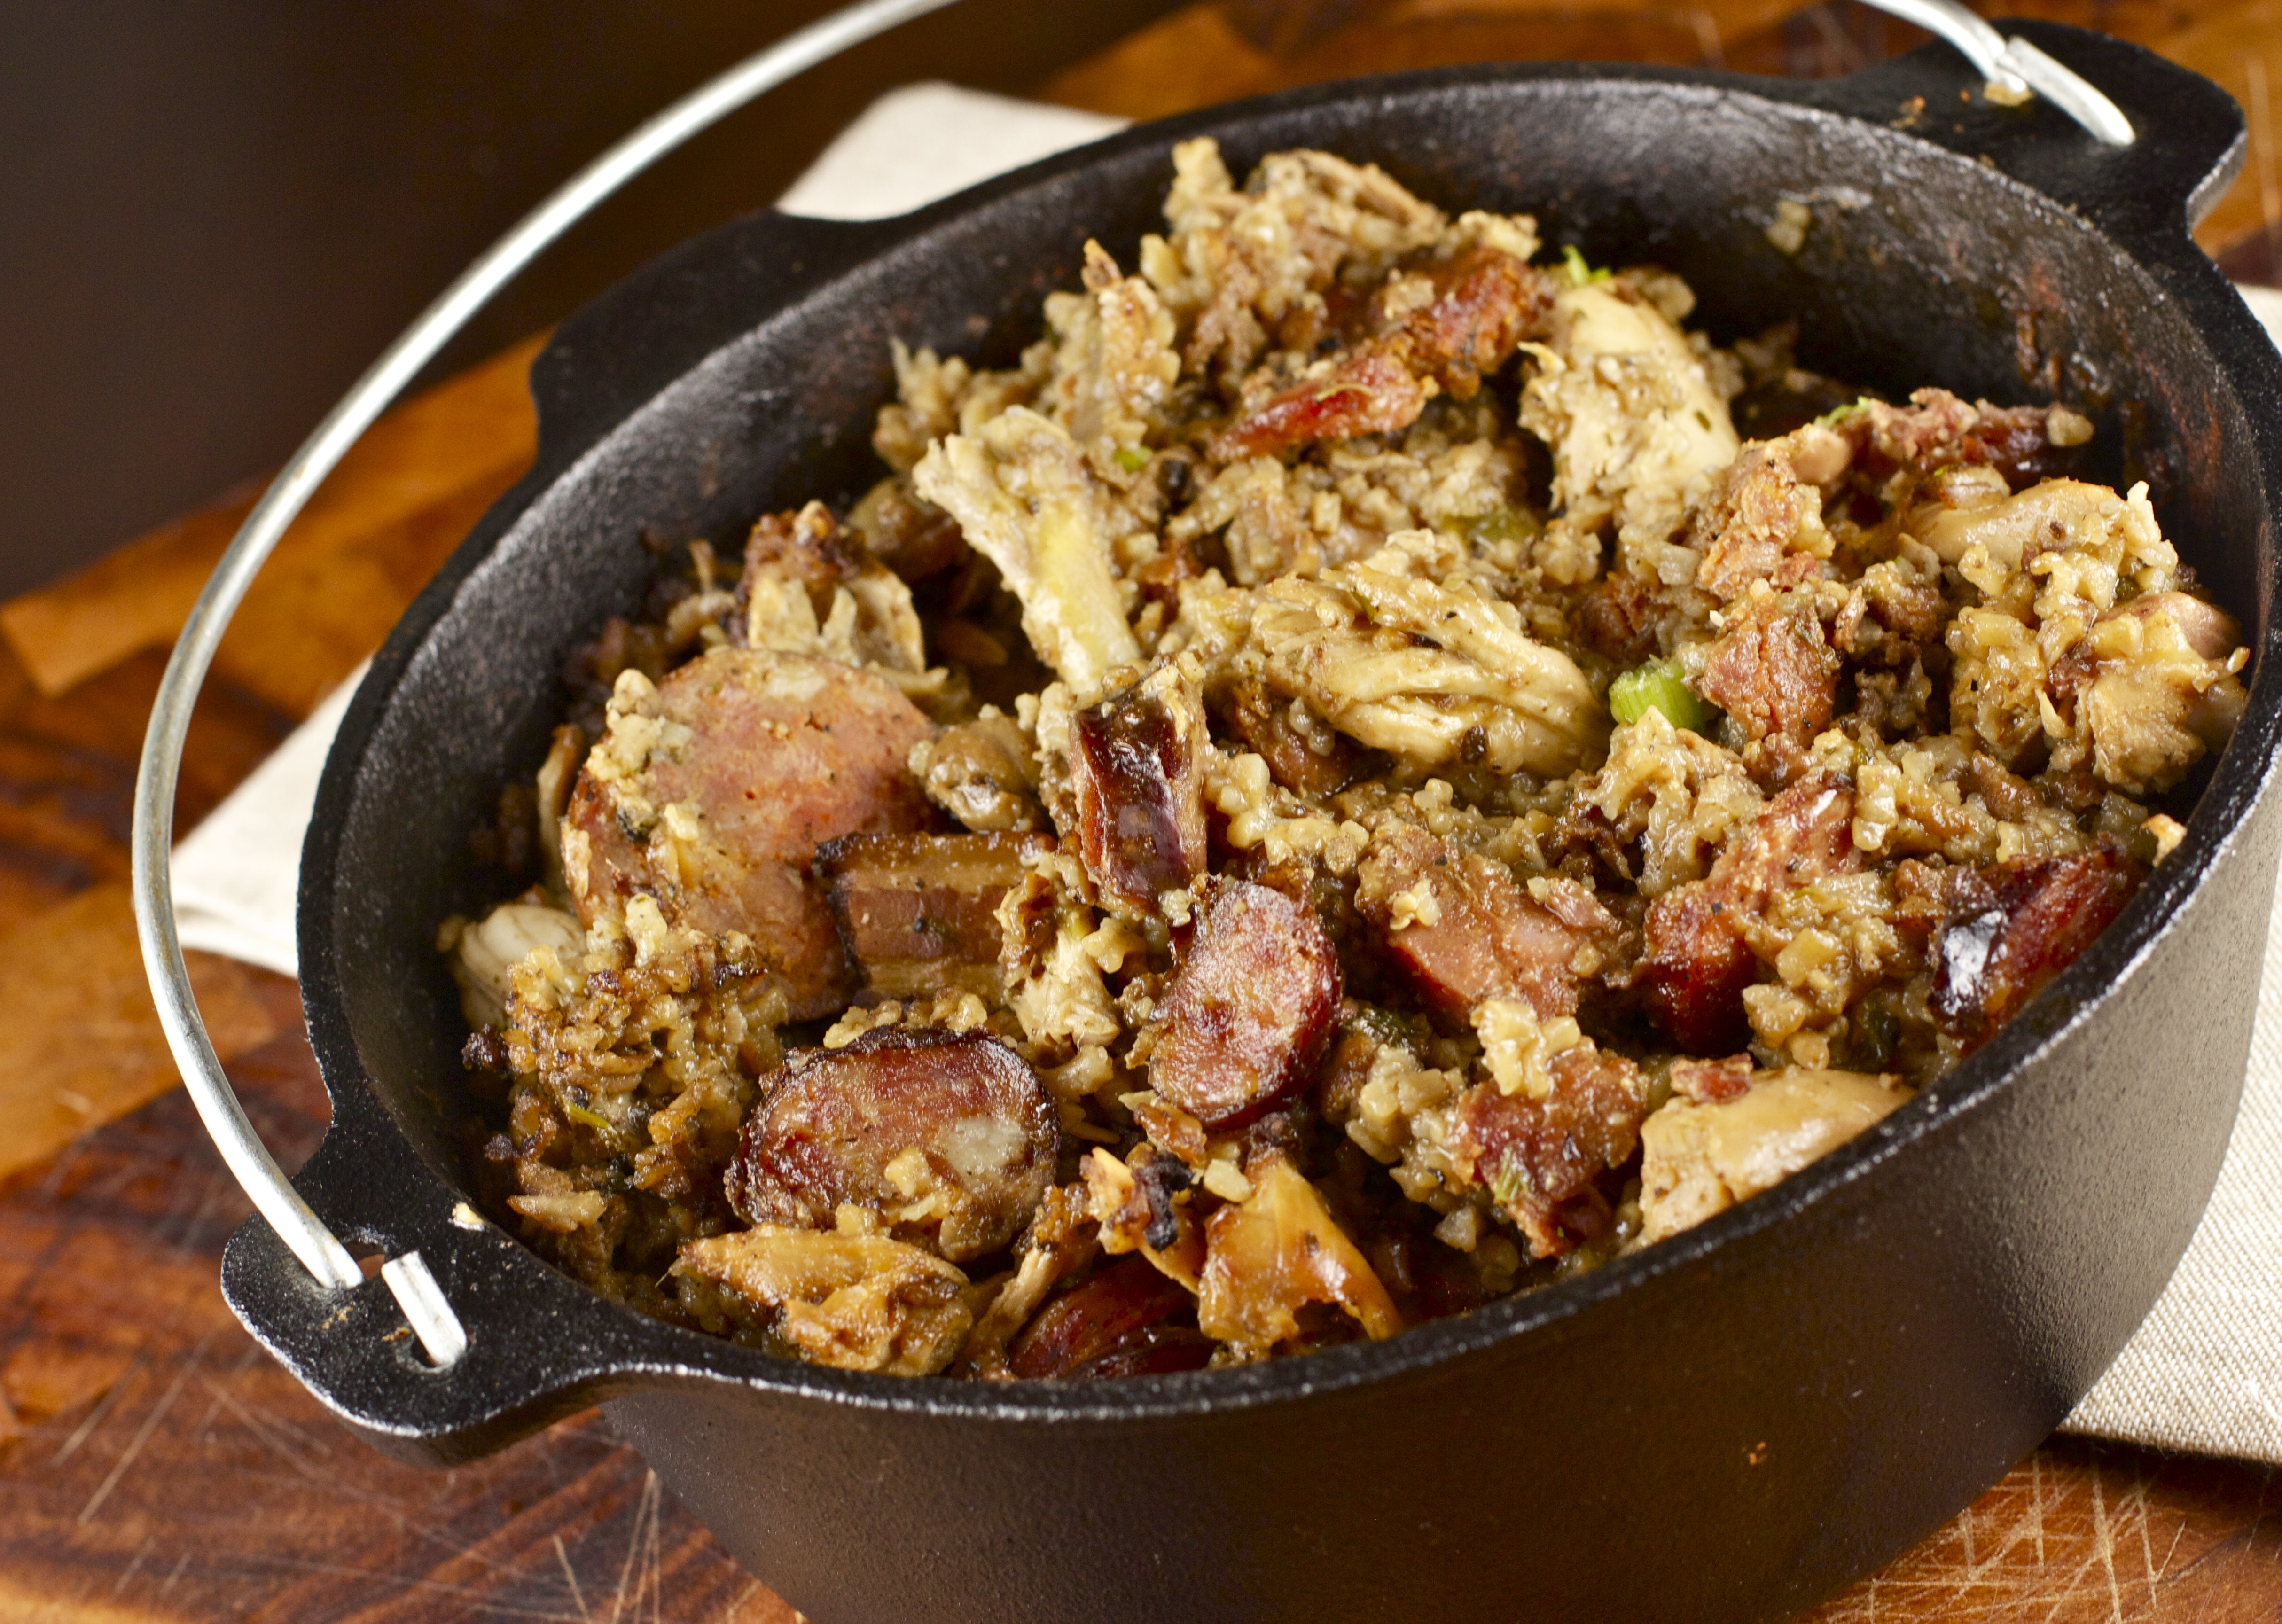 The jambalaya this person cooked | AnandTech Forums: Technology, Hardware, Software, and Deals